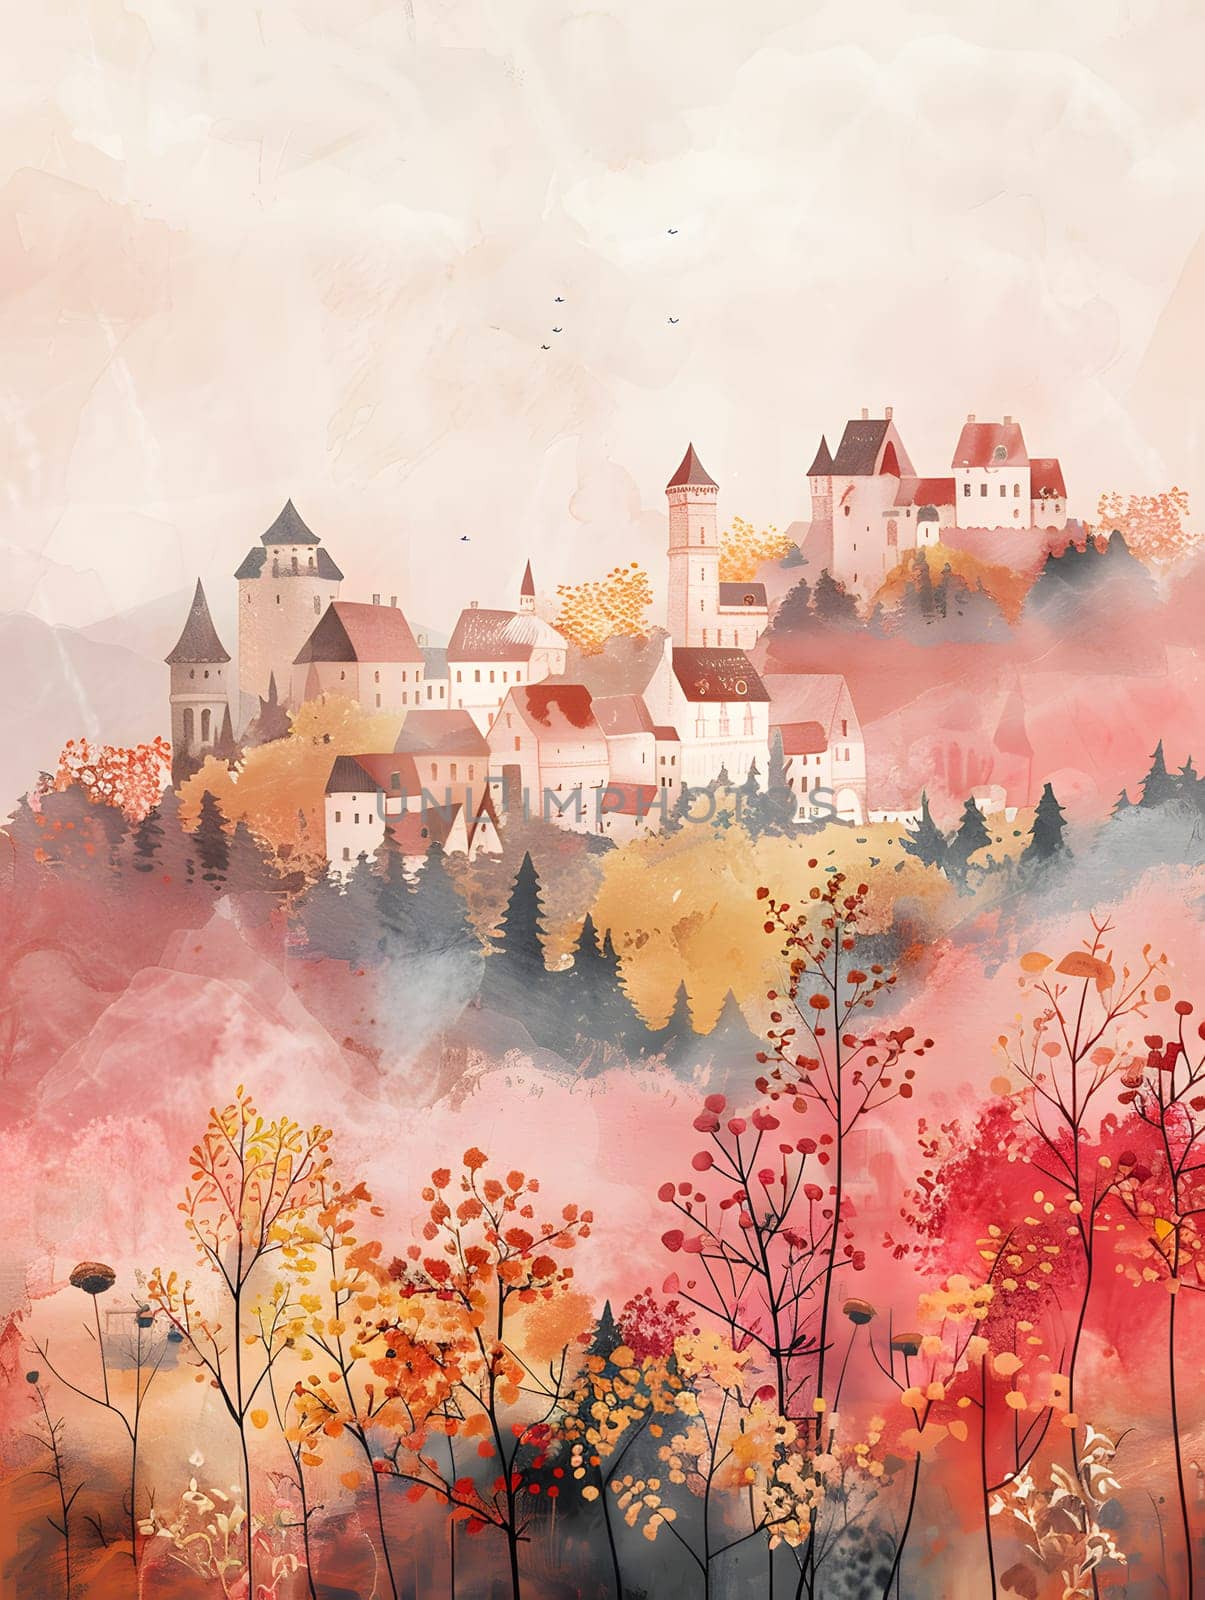 A captivating watercolor painting of a castle perched atop a hill surrounded by lush trees, under a dreamy sky with fluffy clouds, showcasing the beauty of nature and architecture in art